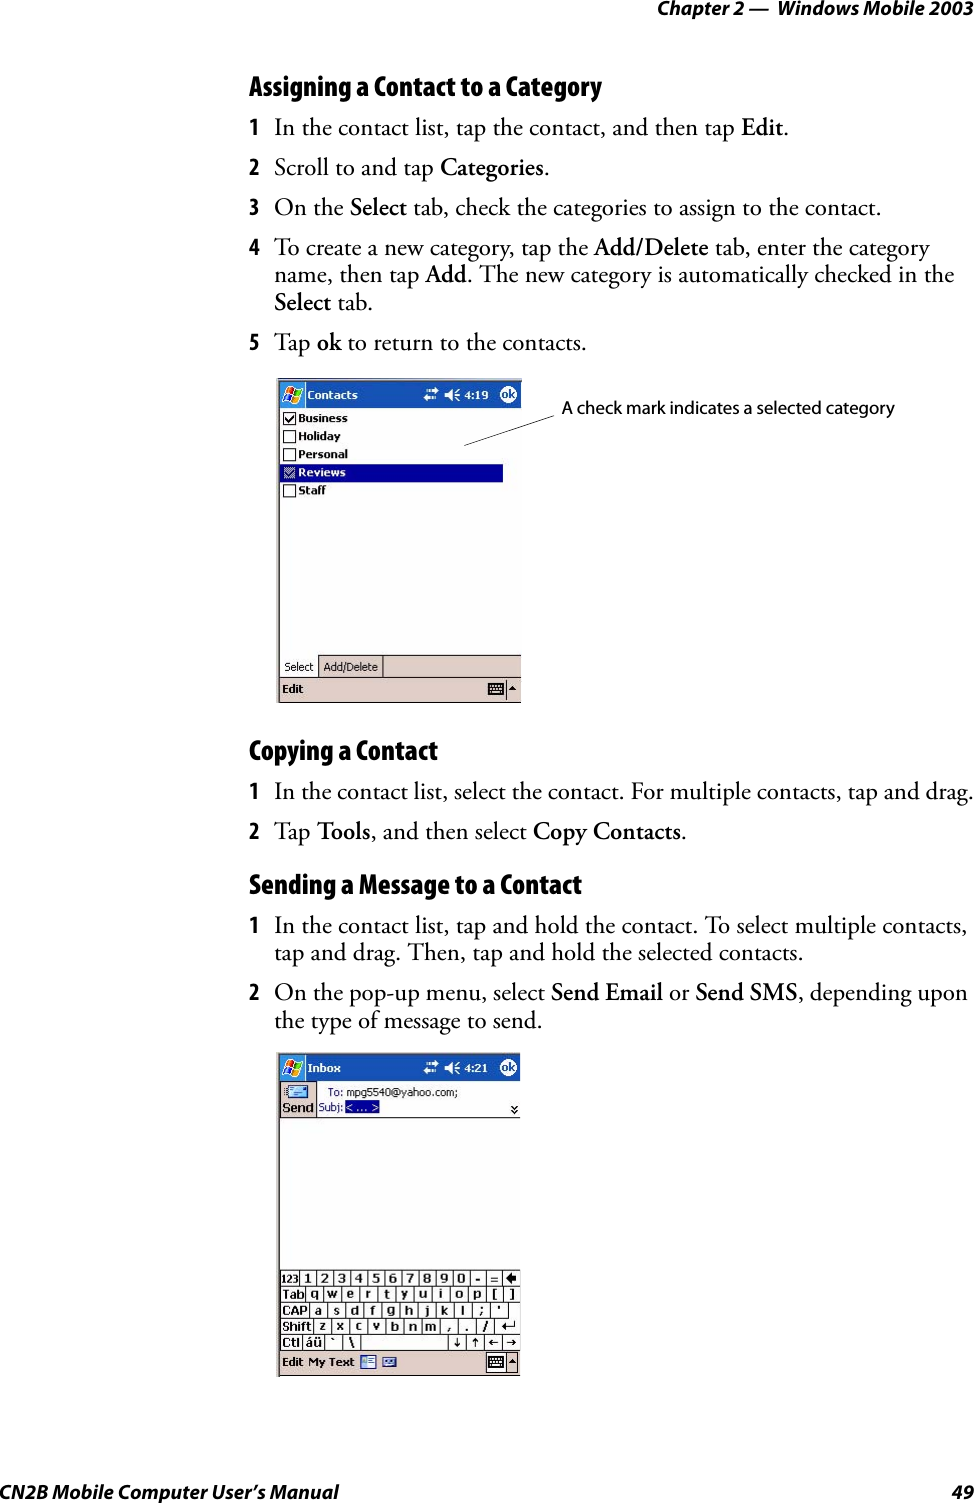 Chapter 2 —  Windows Mobile 2003CN2B Mobile Computer User’s Manual 49Assigning a Contact to a Category1In the contact list, tap the contact, and then tap Edit.2Scroll to and tap Categories.3On the Select tab, check the categories to assign to the contact.4To create a new category, tap the Add/Delete tab, enter the category name, then tap Add. The new category is automatically checked in the Select tab.5Tap ok to return to the contacts.Copying a Contact1In the contact list, select the contact. For multiple contacts, tap and drag.2Tap To o l s, and then select Copy Contacts.Sending a Message to a Contact1In the contact list, tap and hold the contact. To select multiple contacts, tap and drag. Then, tap and hold the selected contacts.2On the pop-up menu, select Send Email or Send SMS, depending upon the type of message to send.A check mark indicates a selected category